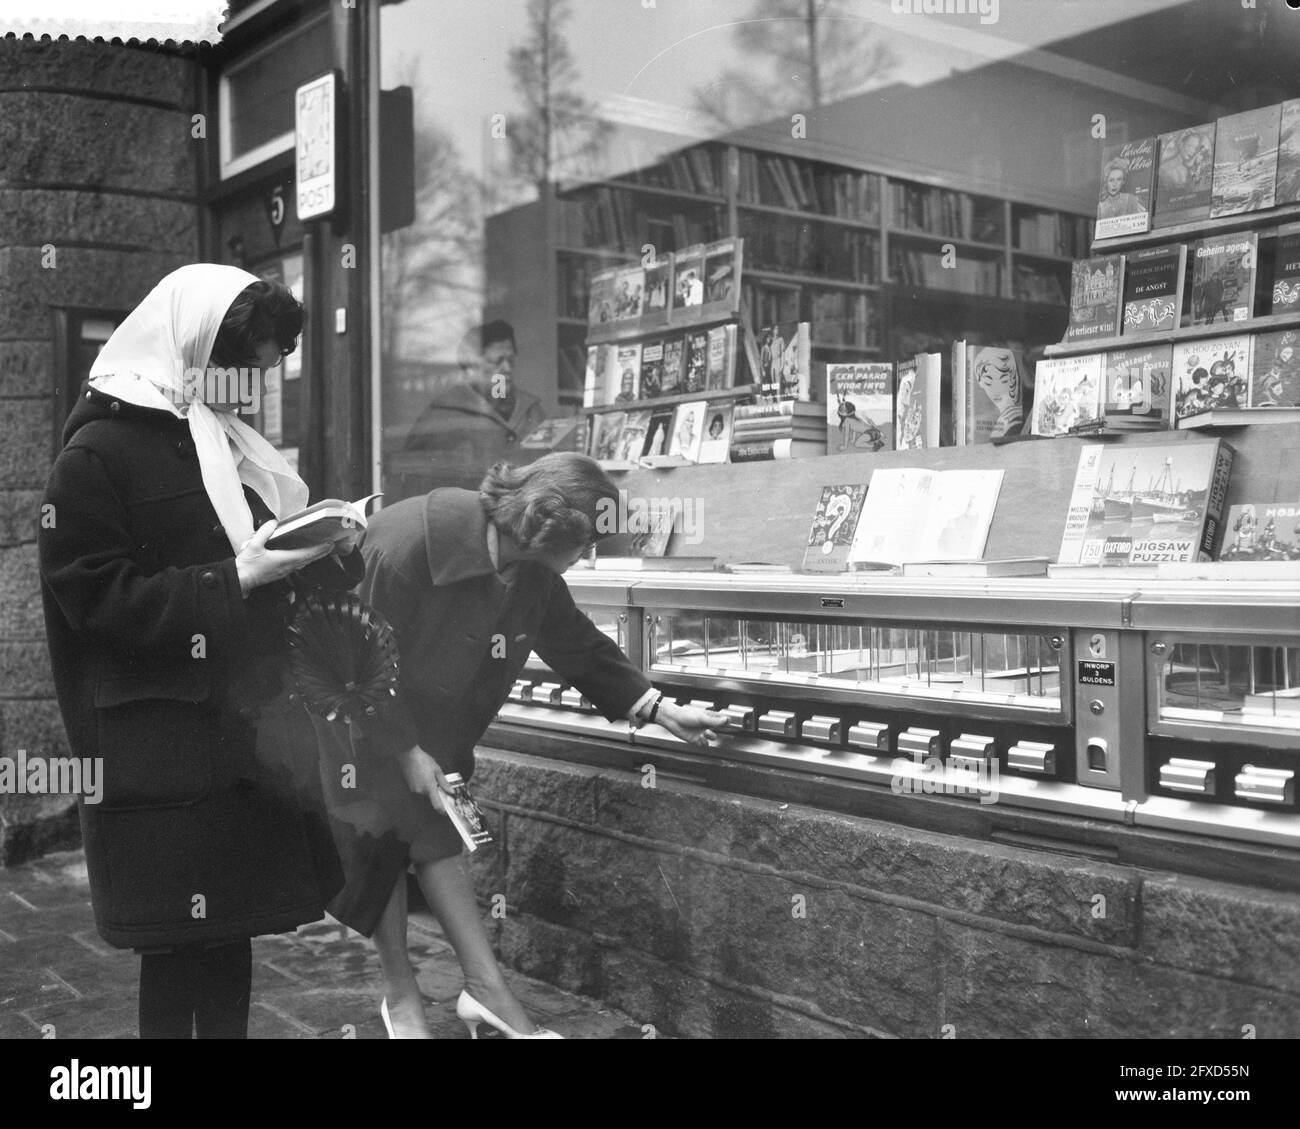 Pocket book machine in the Torn Krusemanstraat in Amsterd, February 10, 1960, The Netherlands, 20th century press agency photo, news to remember, documentary, historic photography 1945-1990, visual stories, human history of the Twentieth Century, capturing moments in time Stock Photo